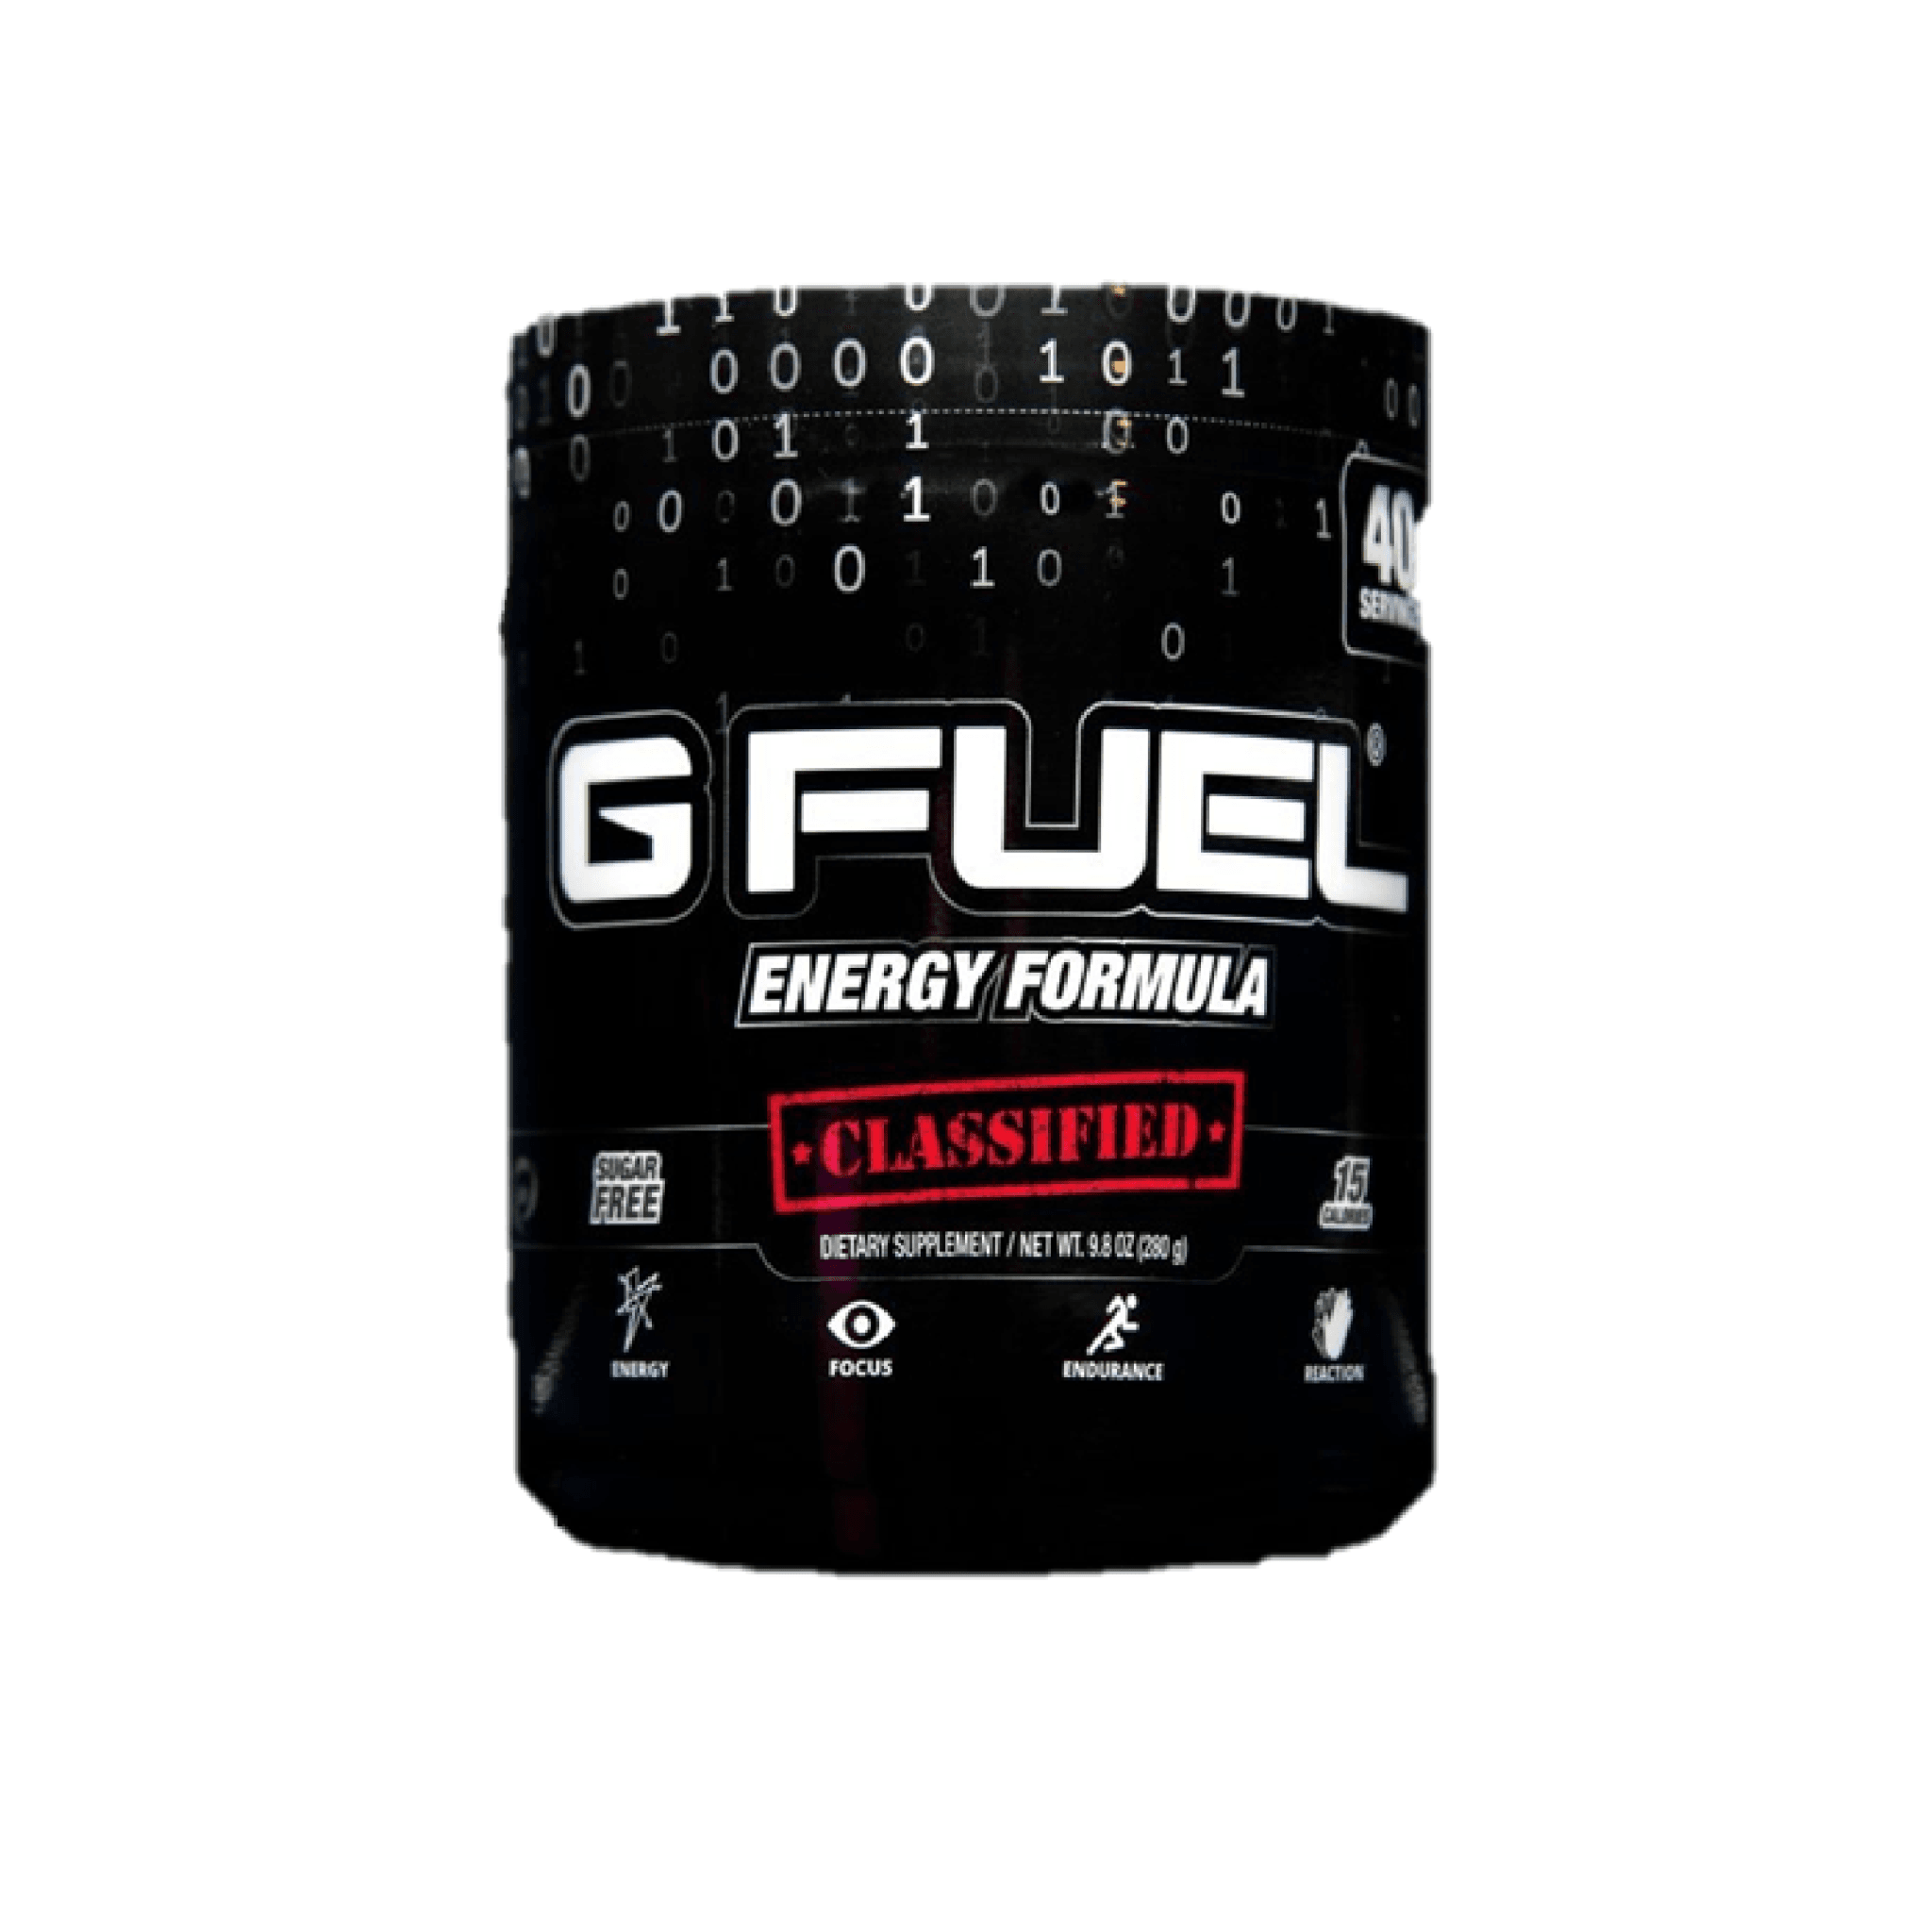 GFuel - Classified Limited edition 280g - Store 974 | ستور ٩٧٤